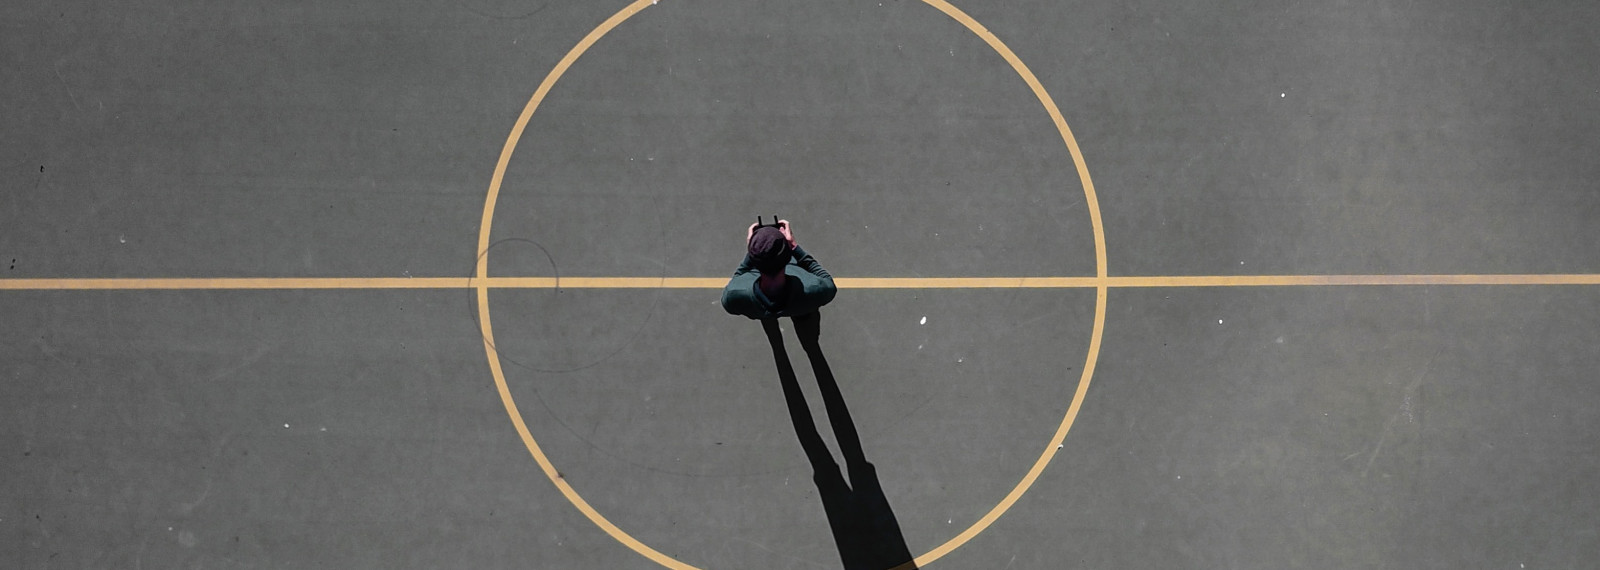 Image looking down on a center circle on a sports pitch